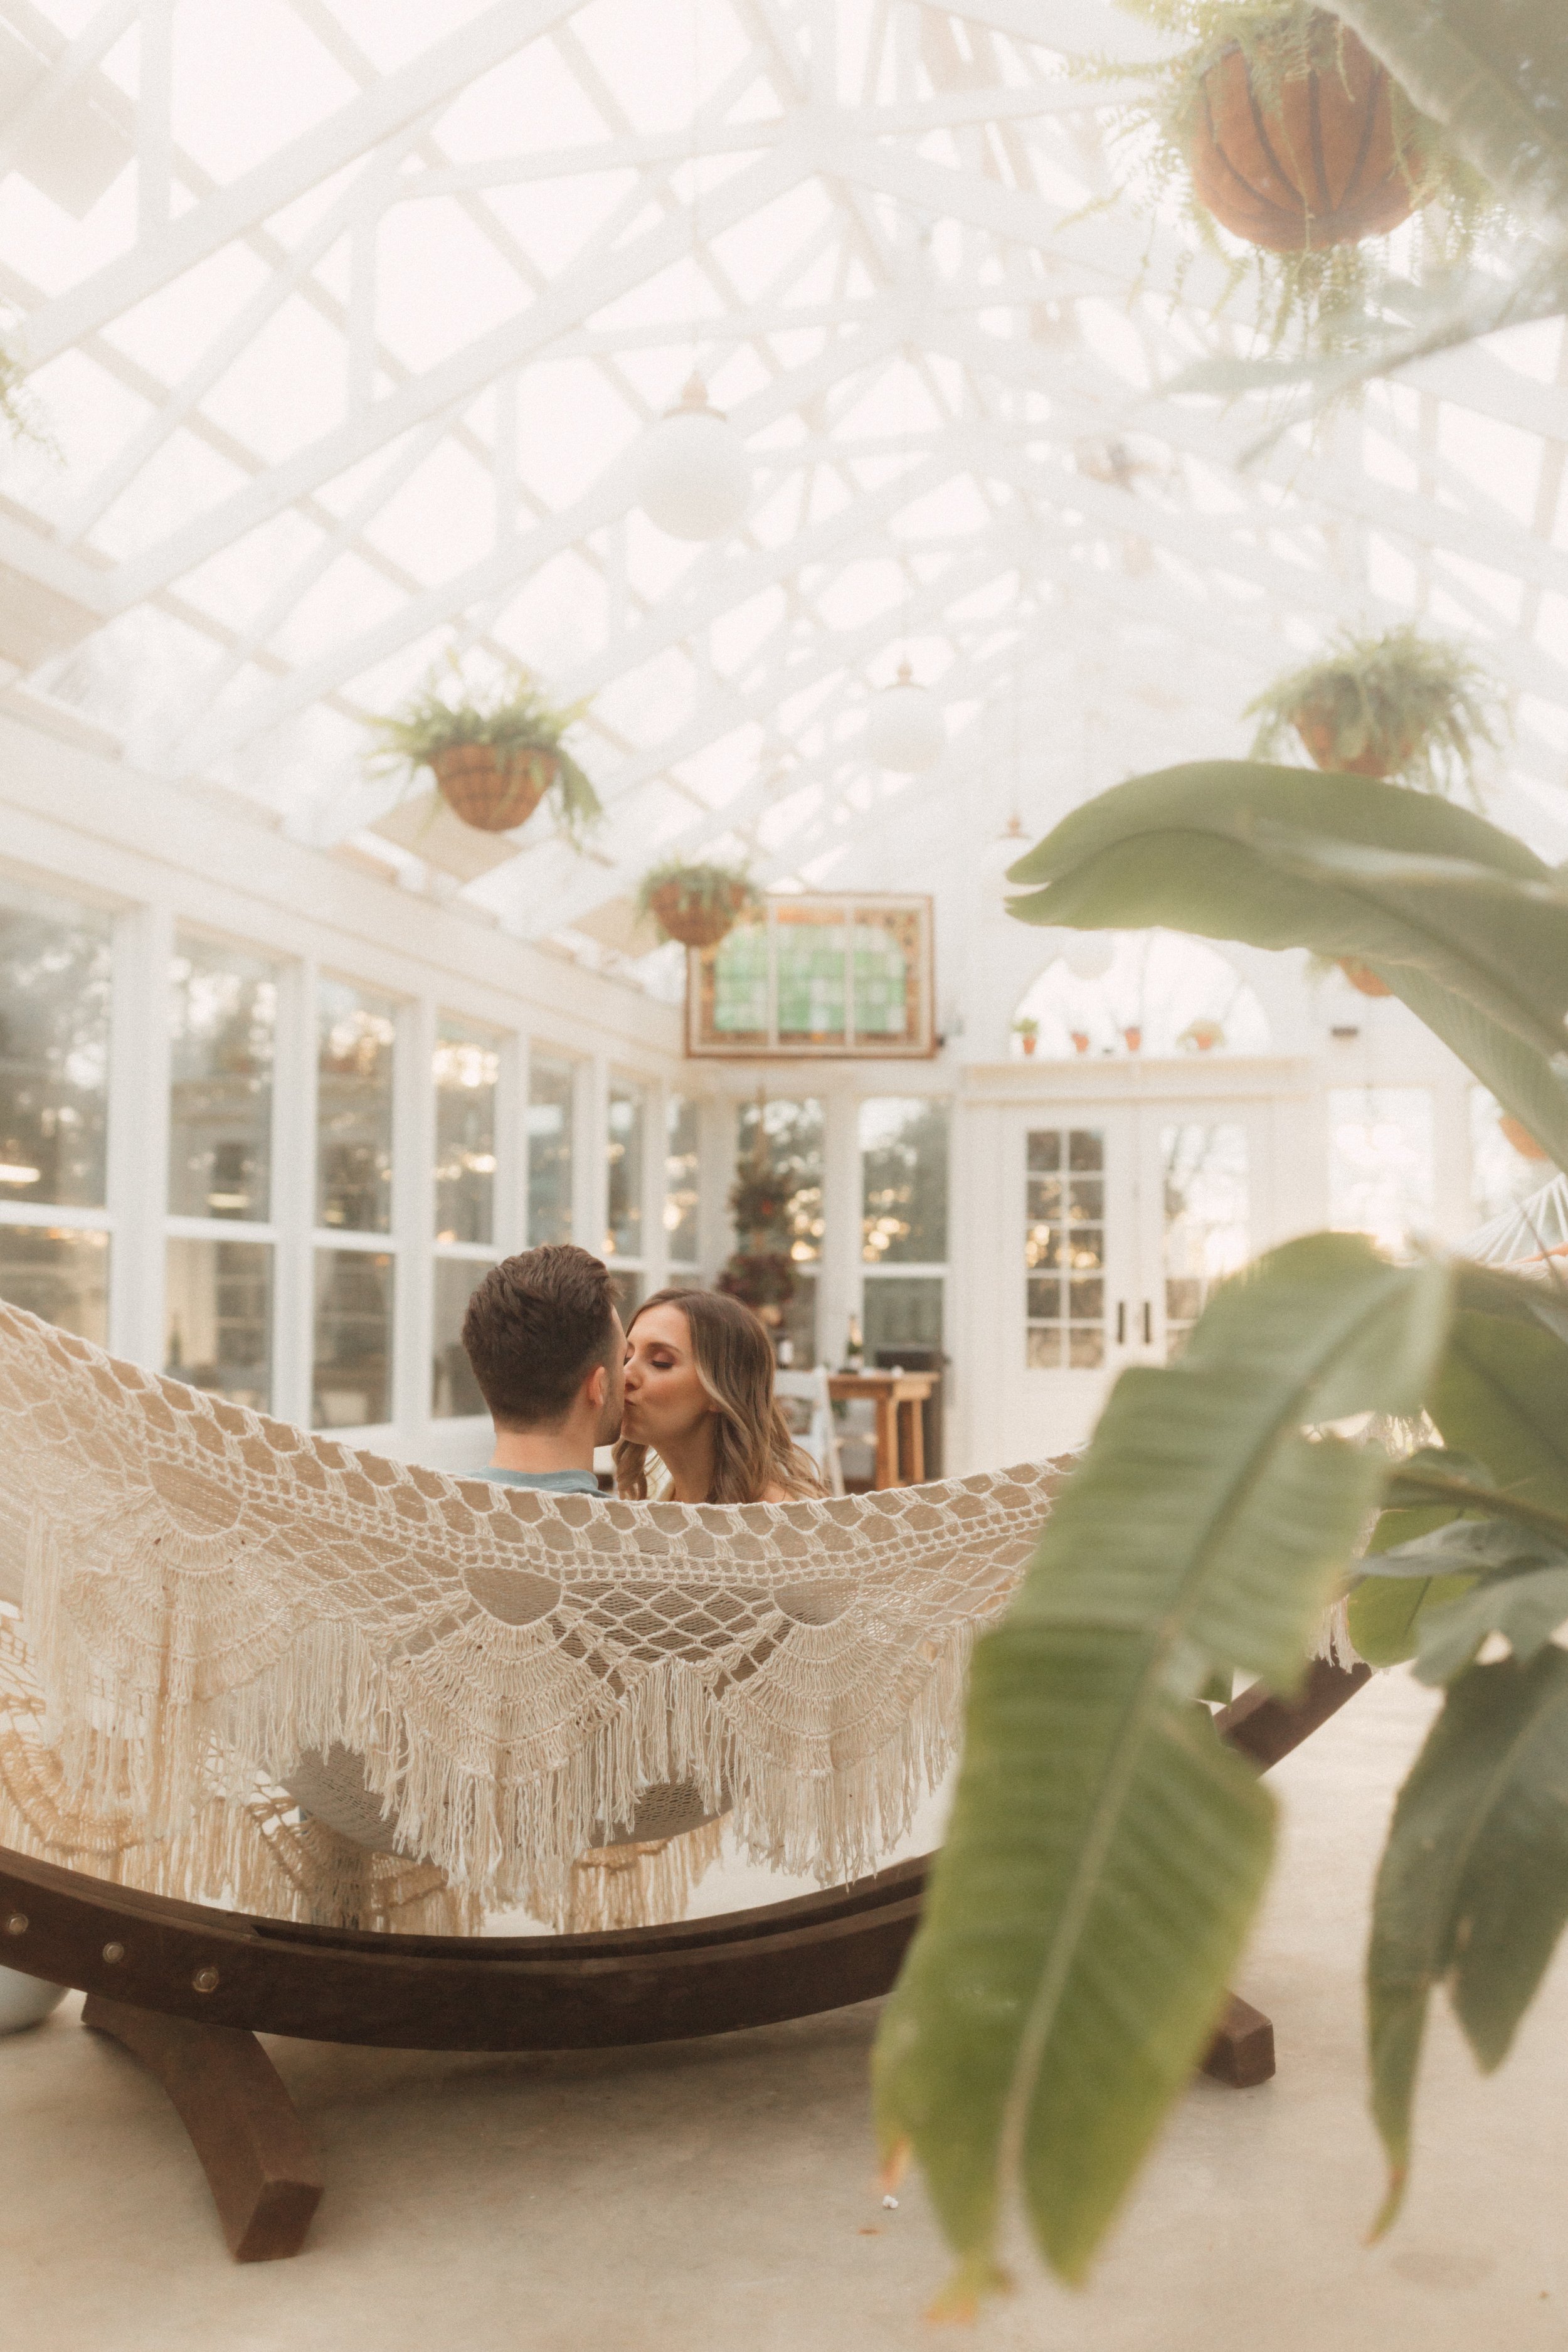 Laura_Ben_Engagment_Session_Winterset_Des_moines_Iowa_Couples_Photographer_Iris_Aisle_Cabin_Conservatory_Candid_Snow_Day_Winter_KMP_Photography-1080.jpg